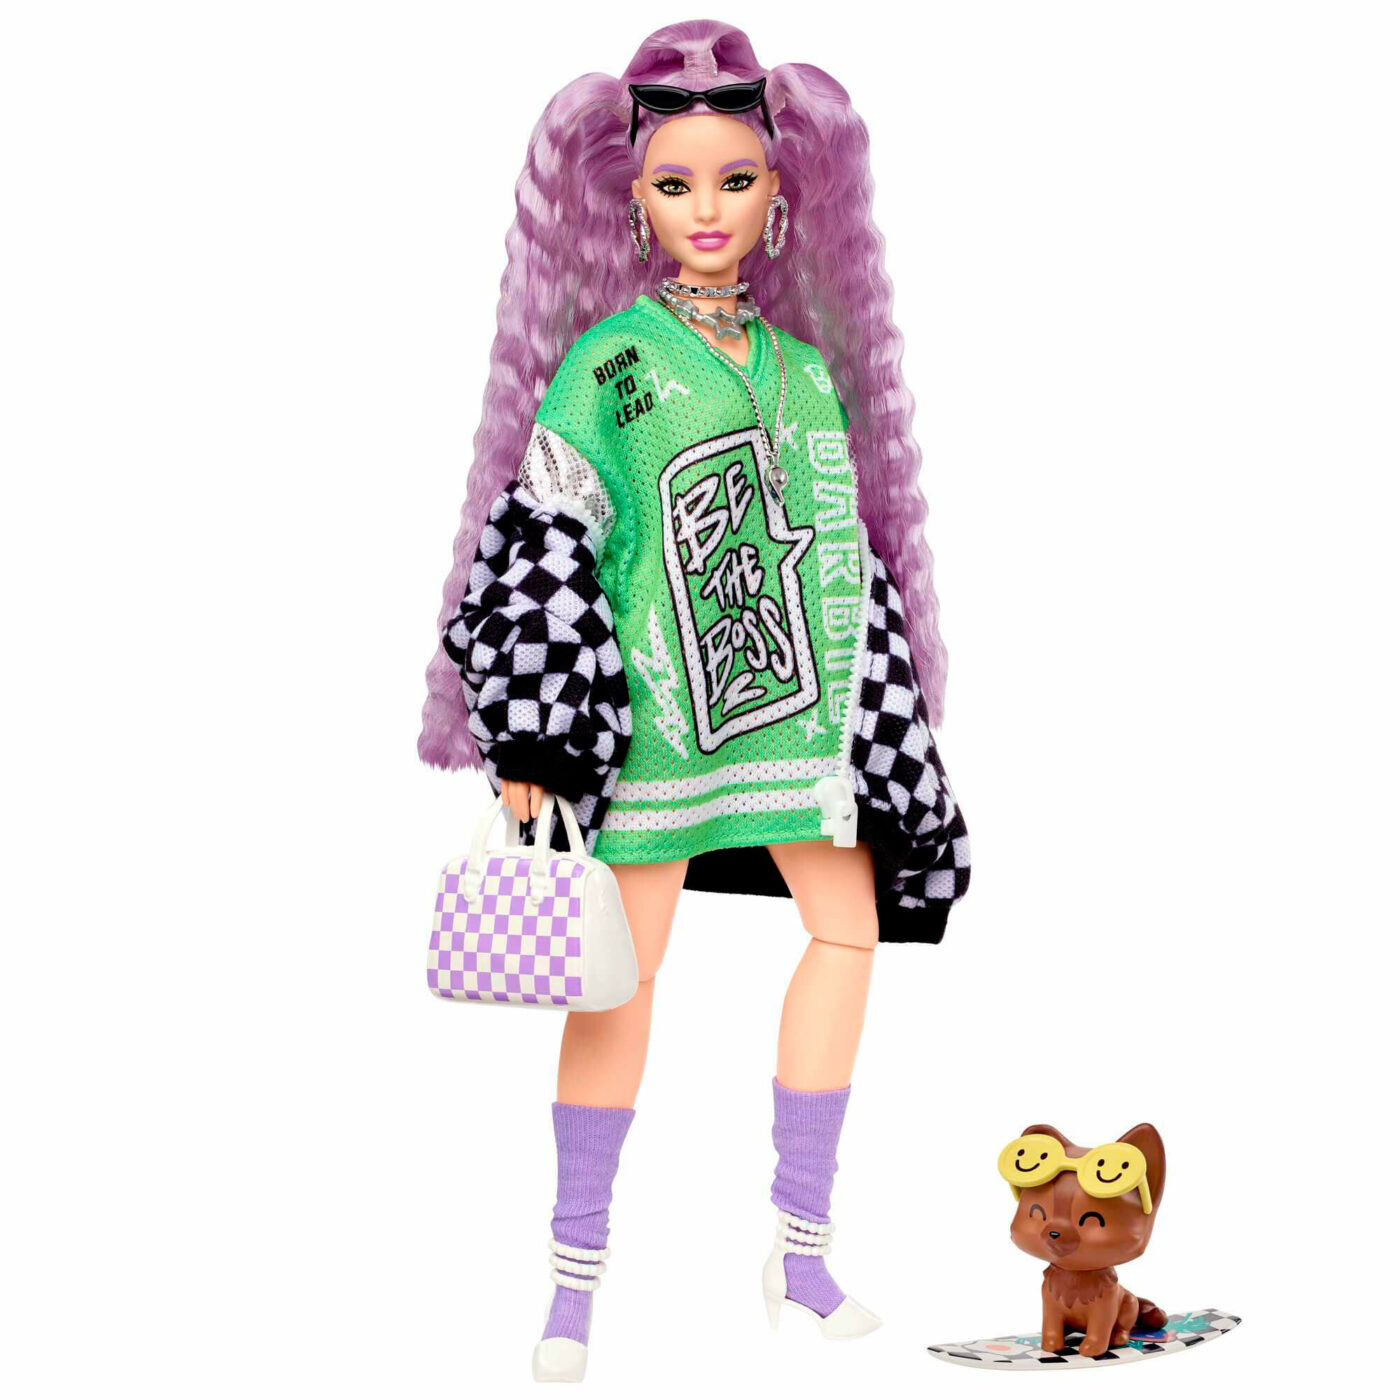 Barbie - Extra Doll in Green Jersey and Checkered Jacket1